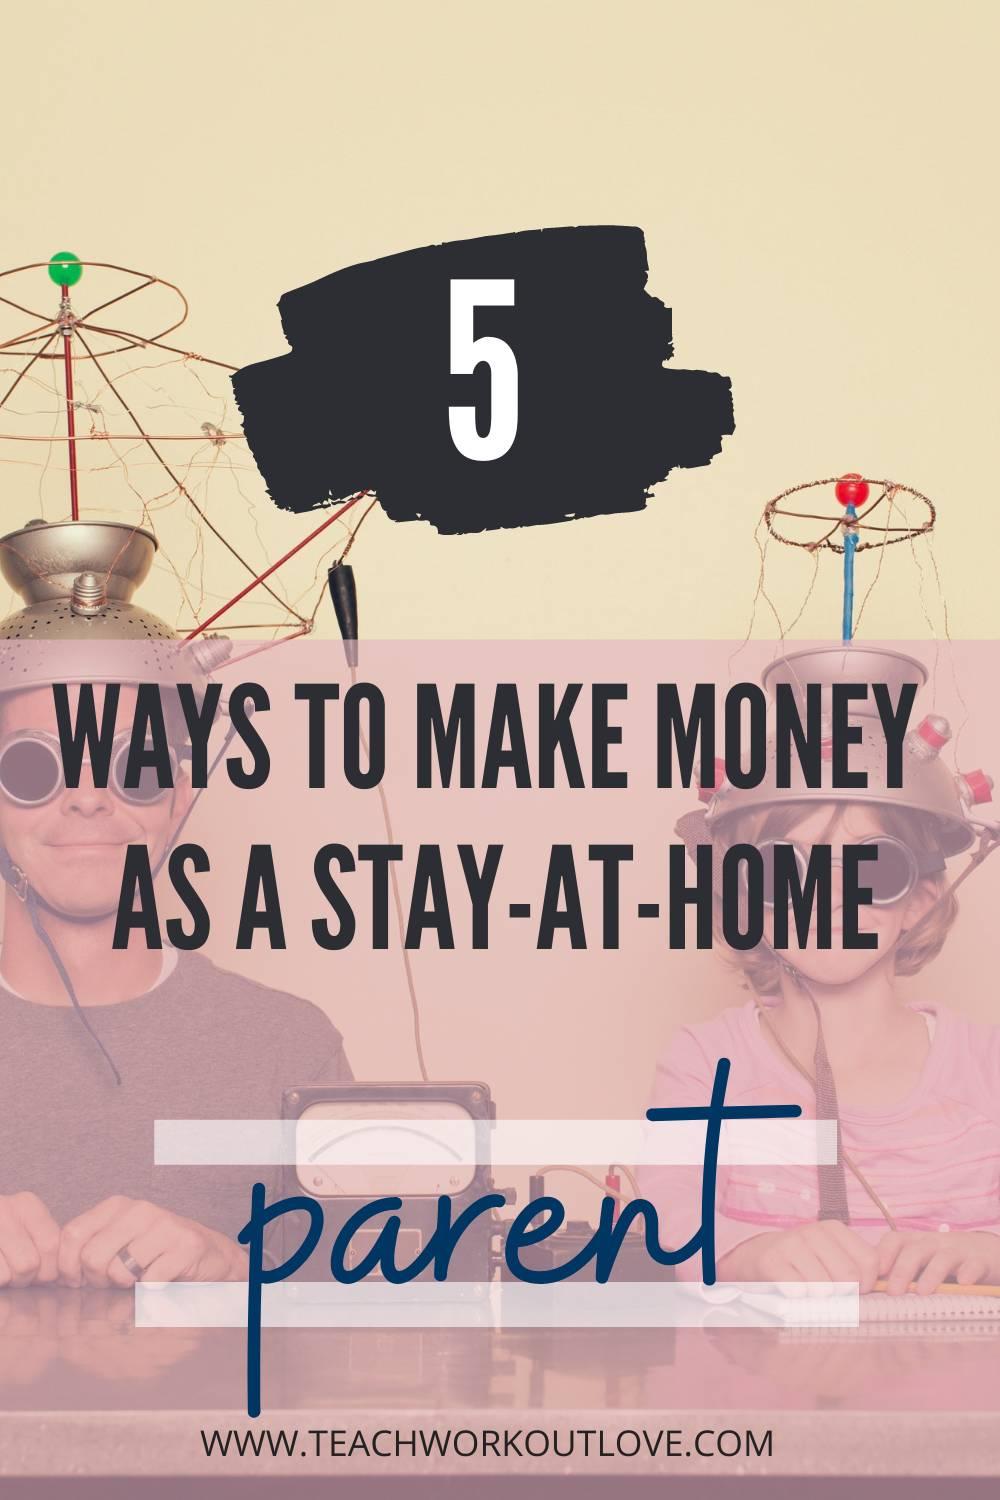 Below are 5 amazing ways you can earn money and sort your finances without sacrificing time at home with your little ones.